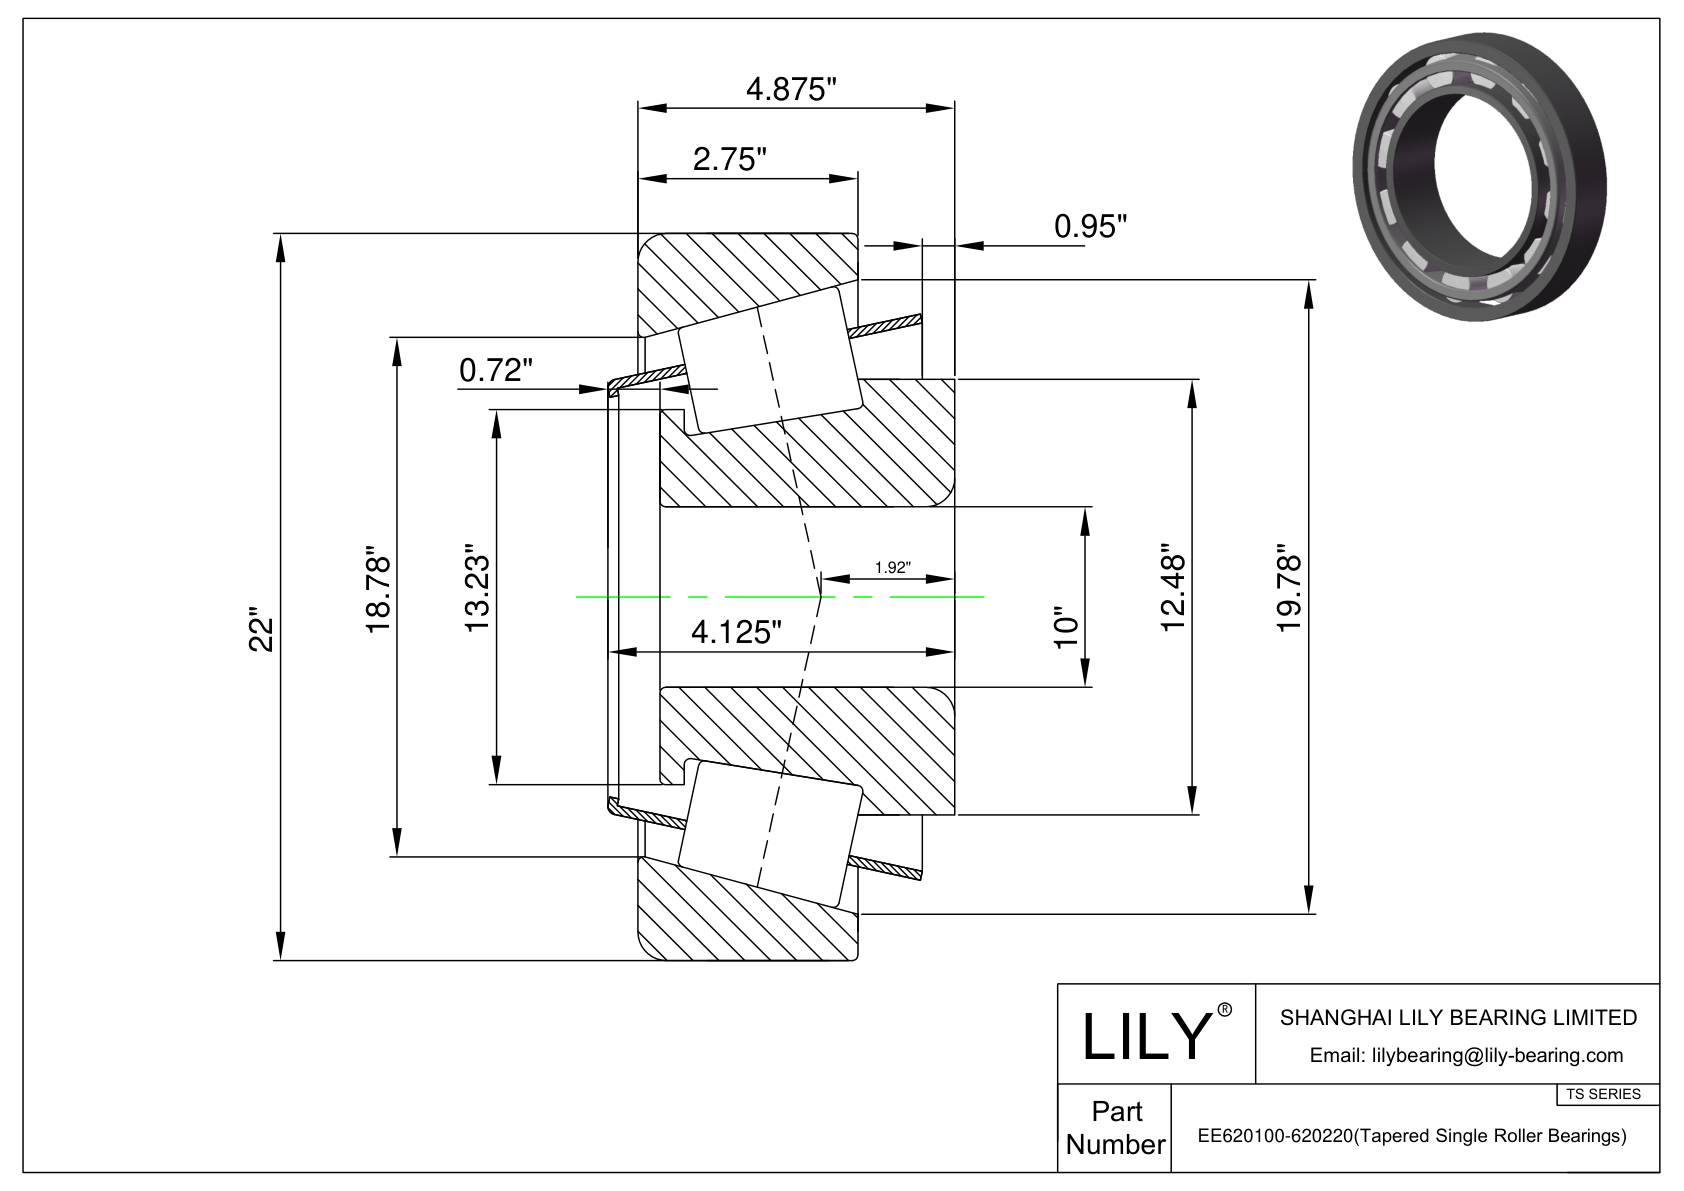 EE620100-620220 TS (Tapered Single Roller Bearings) (Imperial) cad drawing